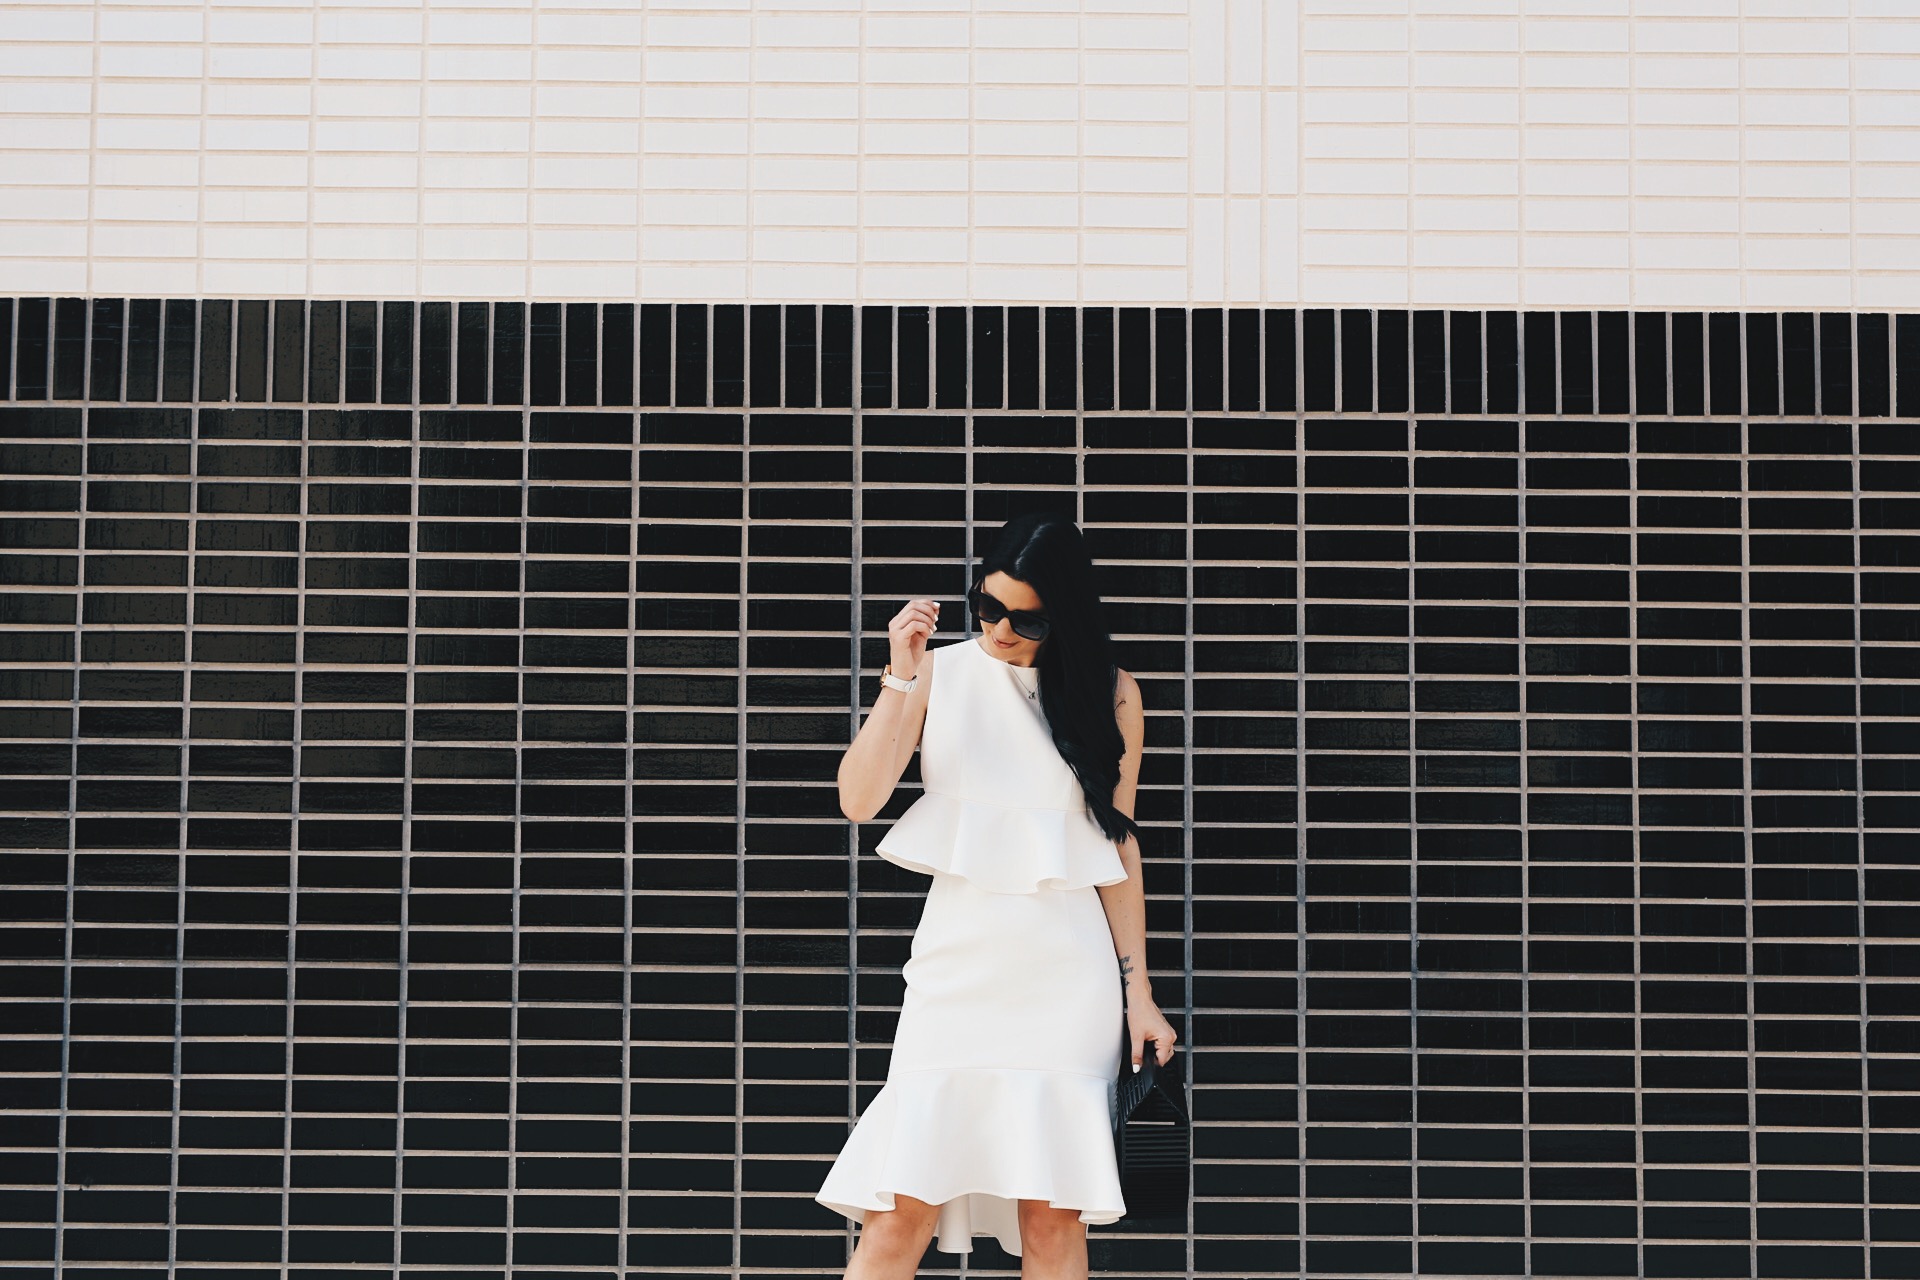 DTKAustin shares a versatile white top and skirt set from Chicwish. Perfect for Spring/Summer and the upcoming Kentucky Derby. Black Bamboo bag from Red Dress Boutique or Cult Gaia. - White Two Piece Set styled by popular Austin fashion blogger, Dressed to Kill